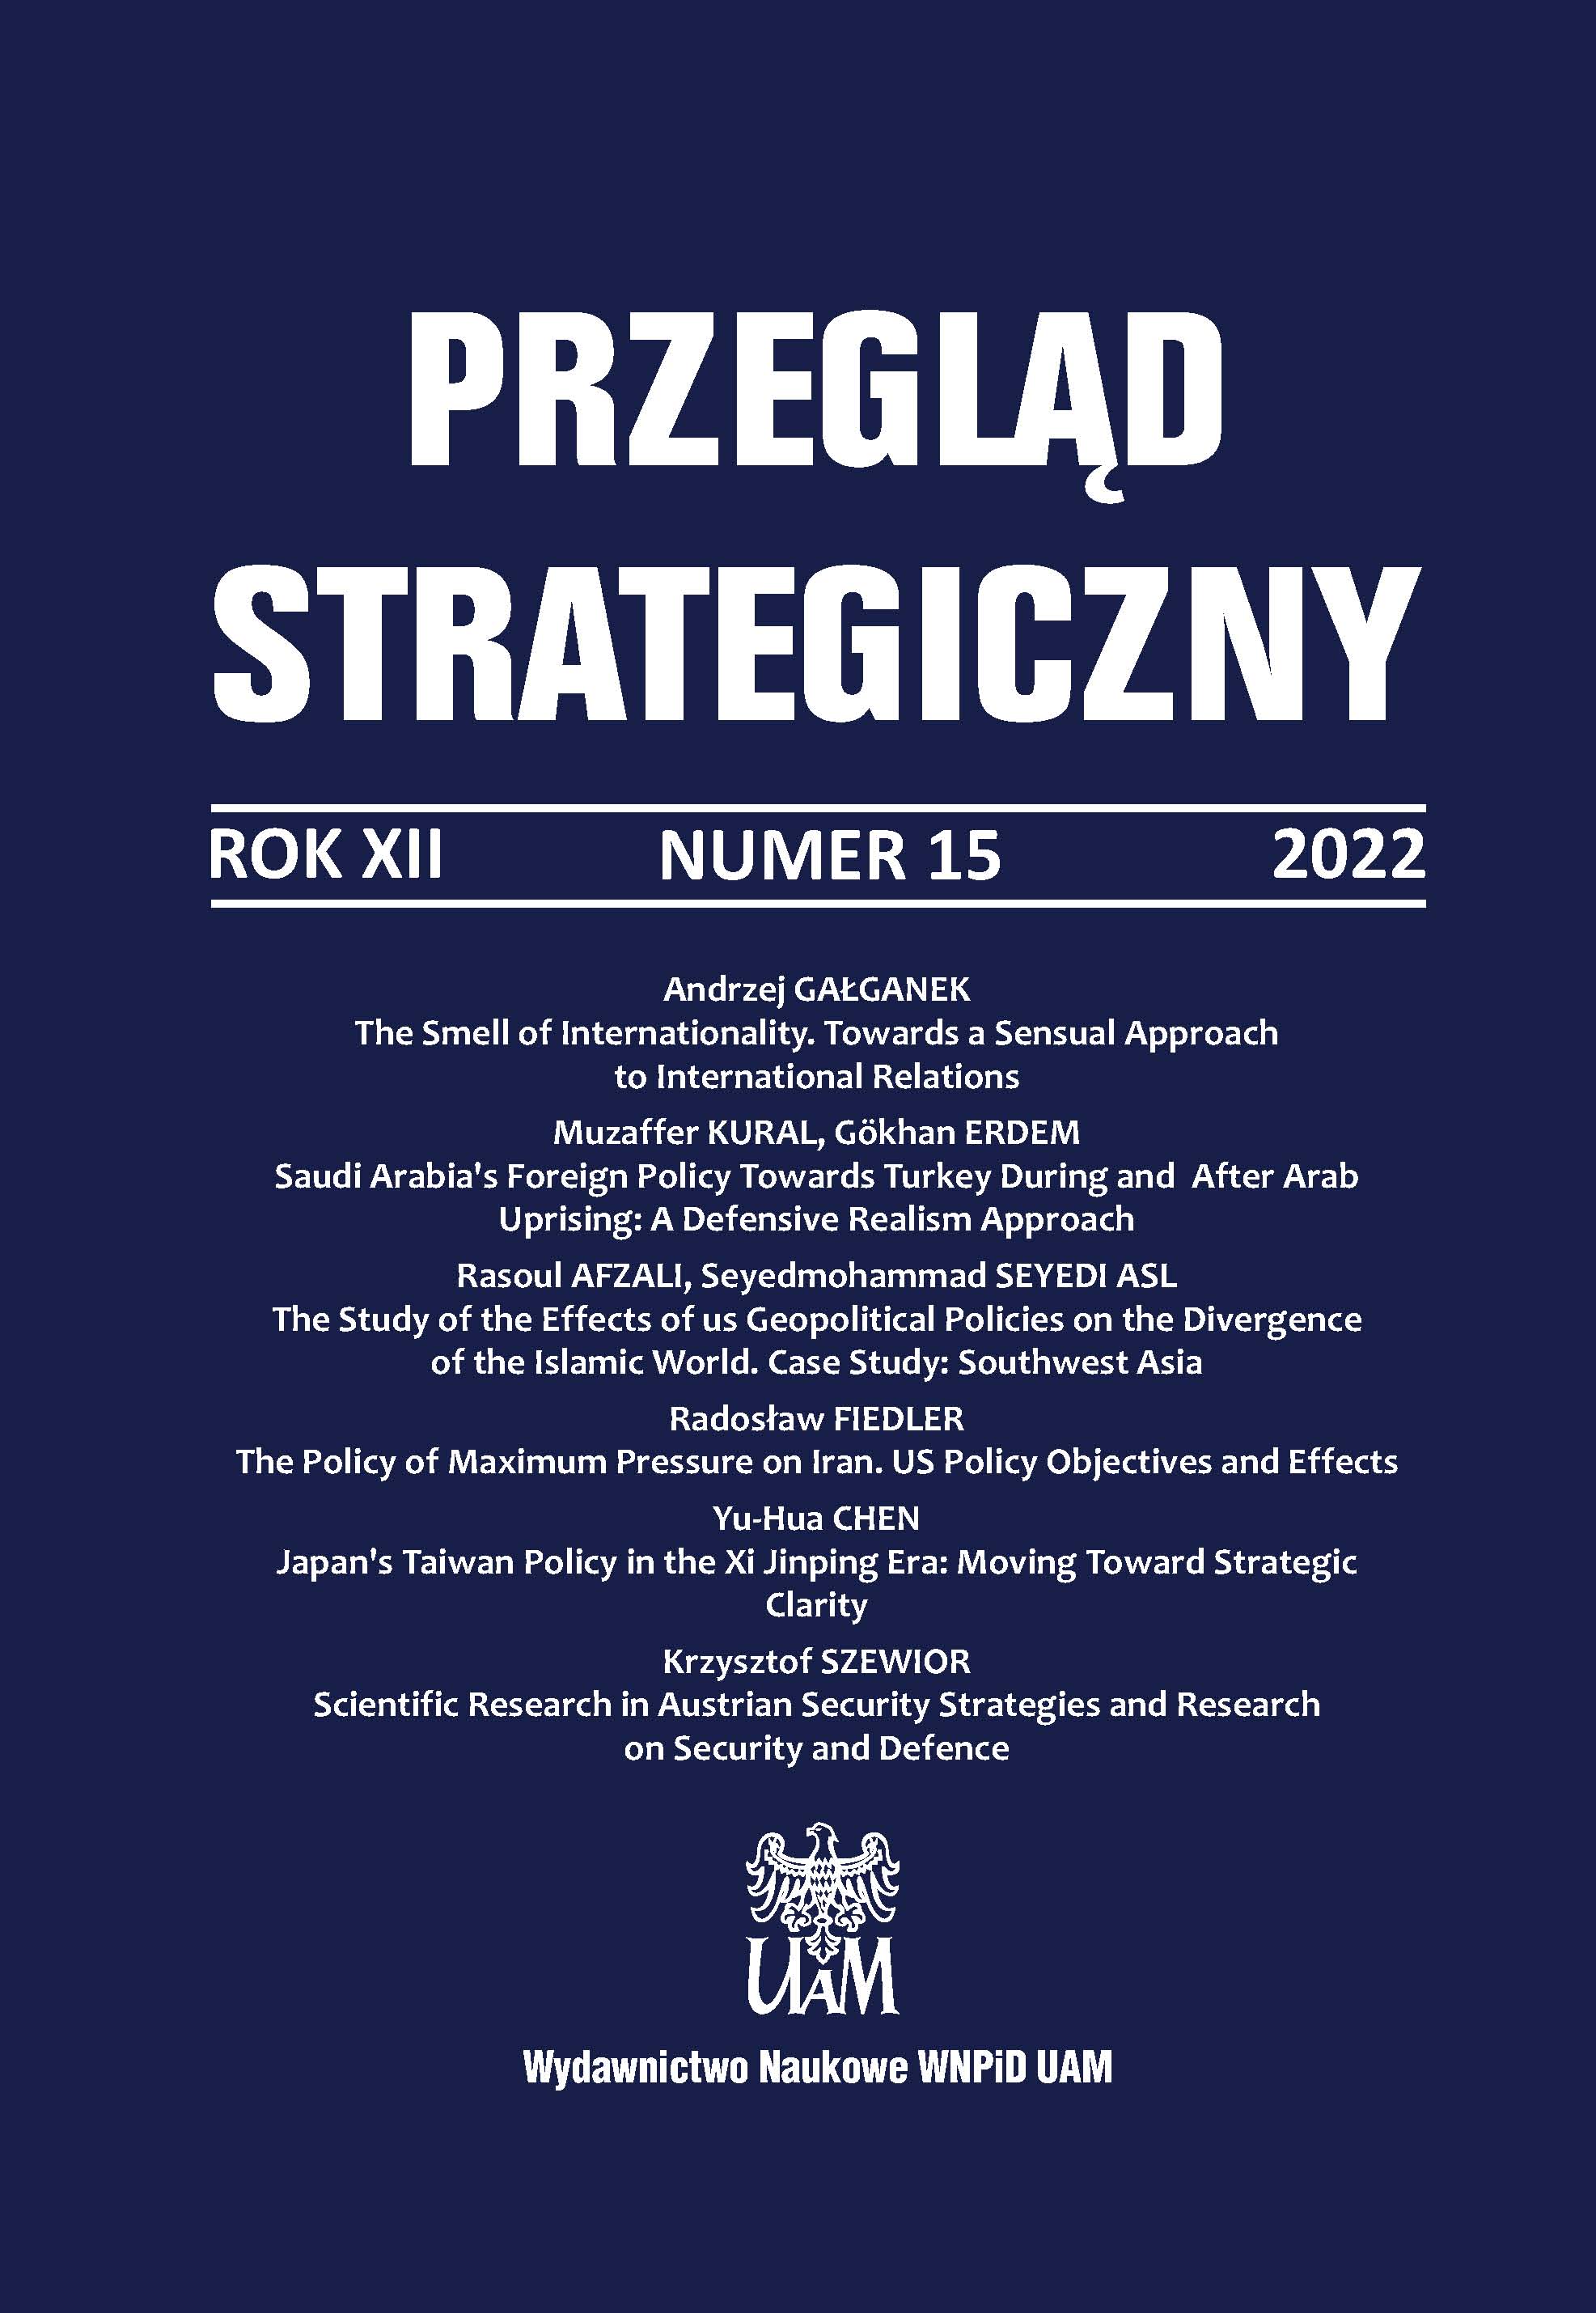 The End of Artic Exceptionalism? New Artic Approach after February 24, 2022 Cover Image